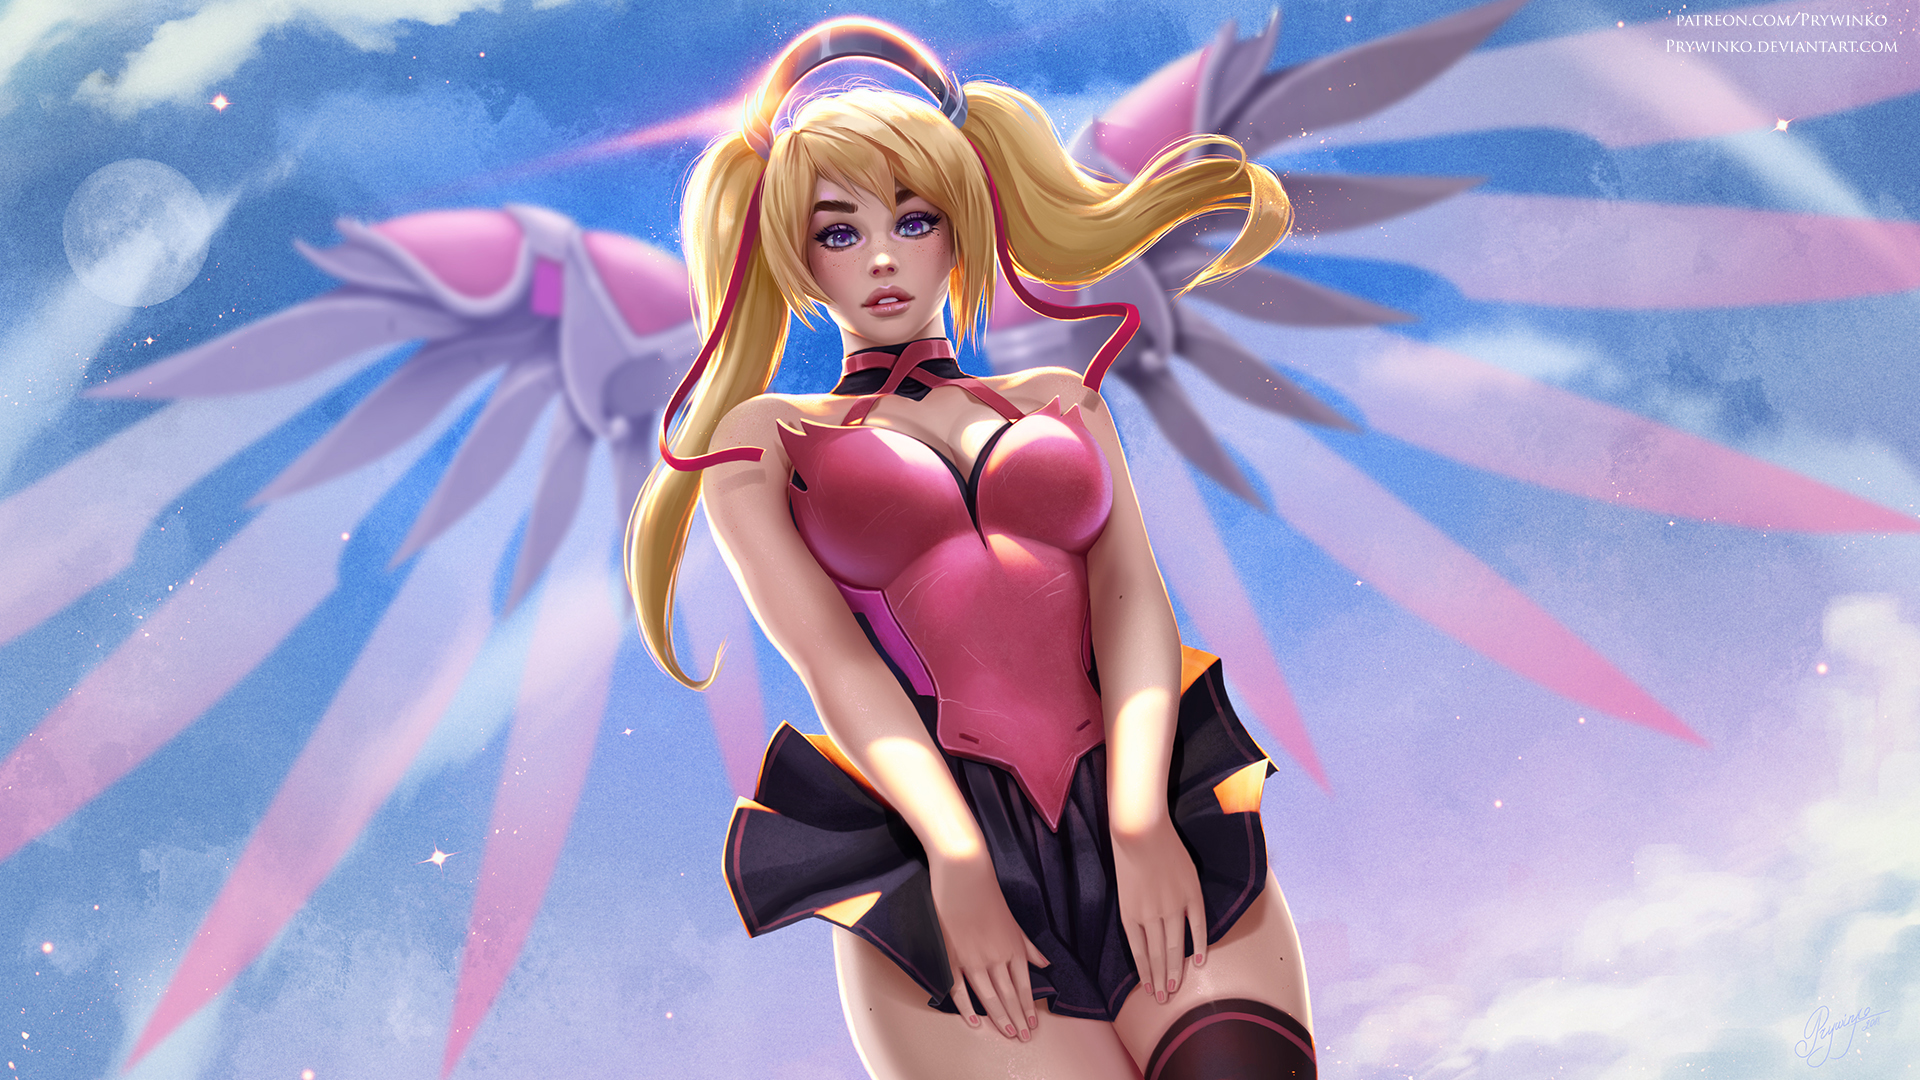 Mercy Overwatch Overwatch Video Games Video Game Characters Video Game Girls Fan Art Blonde Pigtails 1920x1080